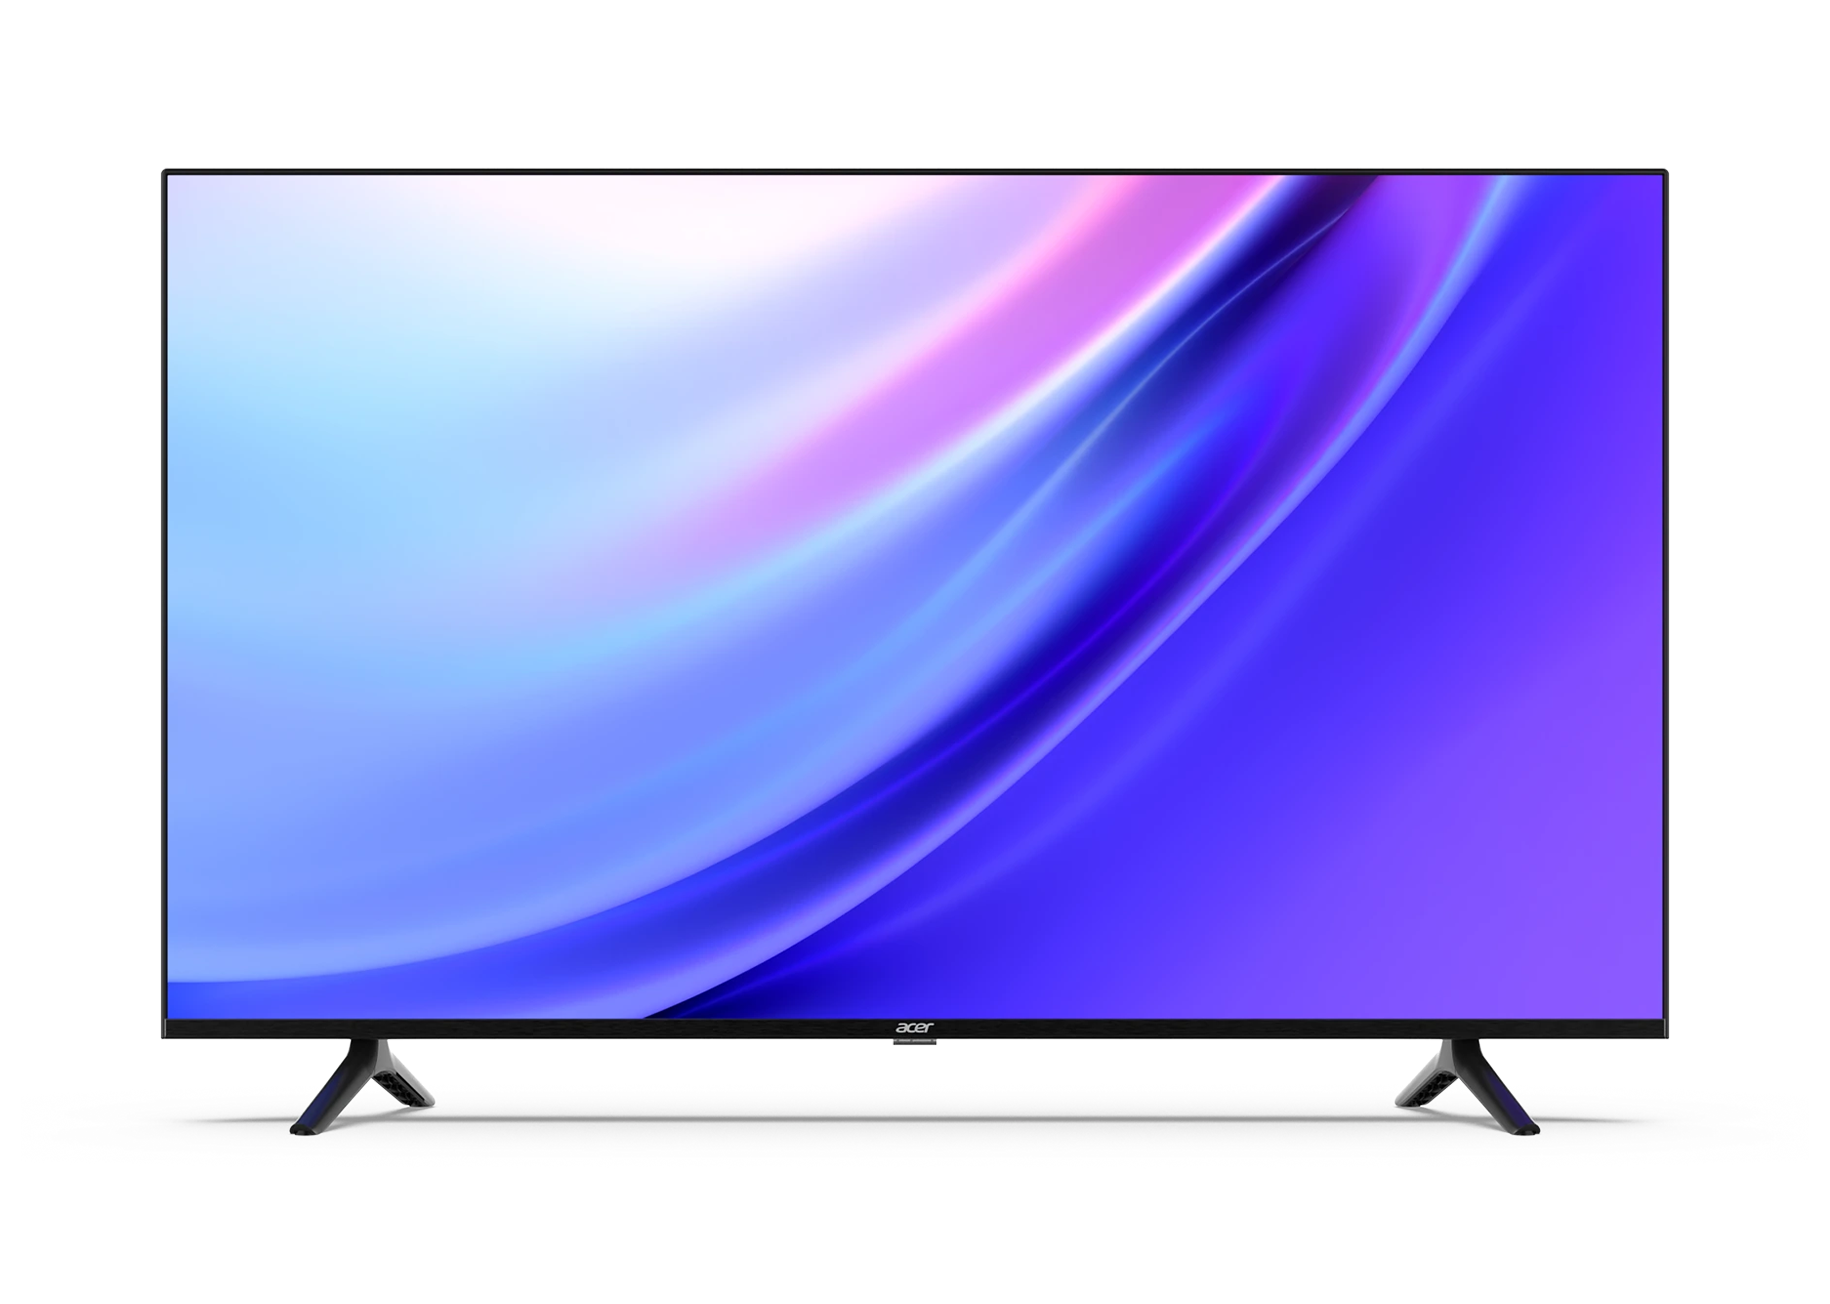 Acer i-series television